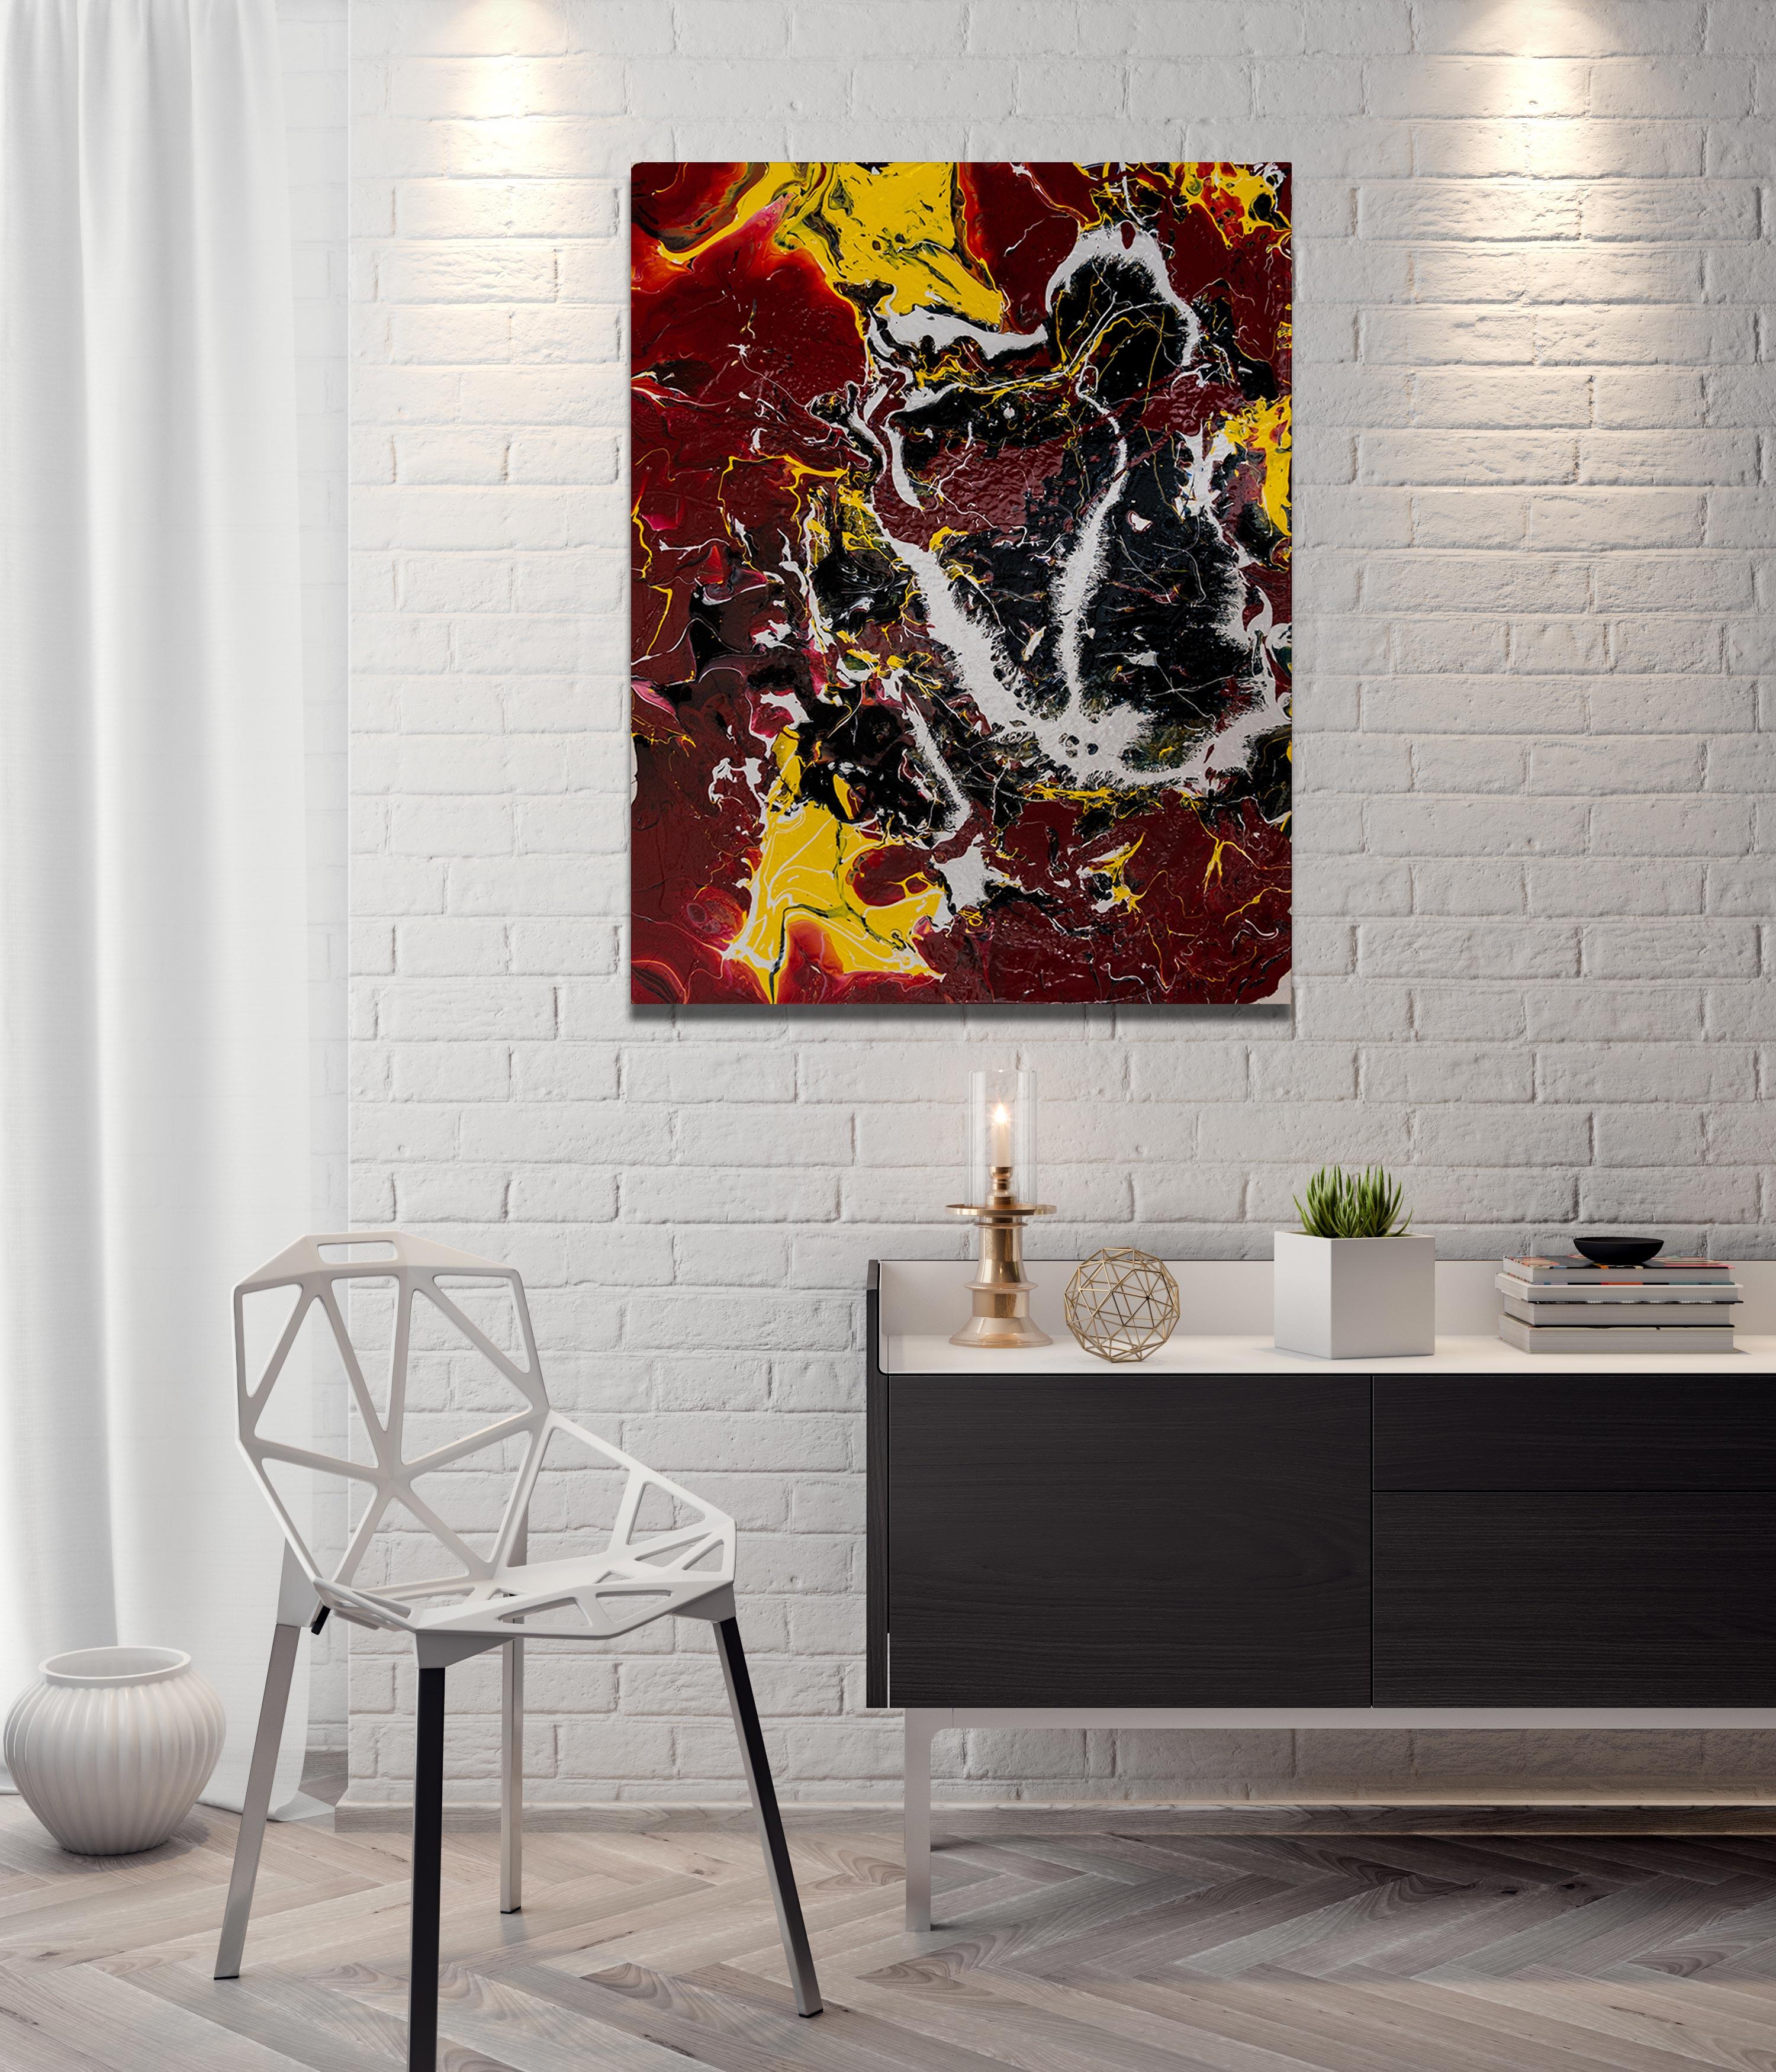 The painting is unframed, acrylic on canvas.

About the Artwork: 
The awesome power of Fusion at the subatomic level.

About the Artist: 
As a visual artist David has been painting and sculpting most of his life. He is also a Julliard trained